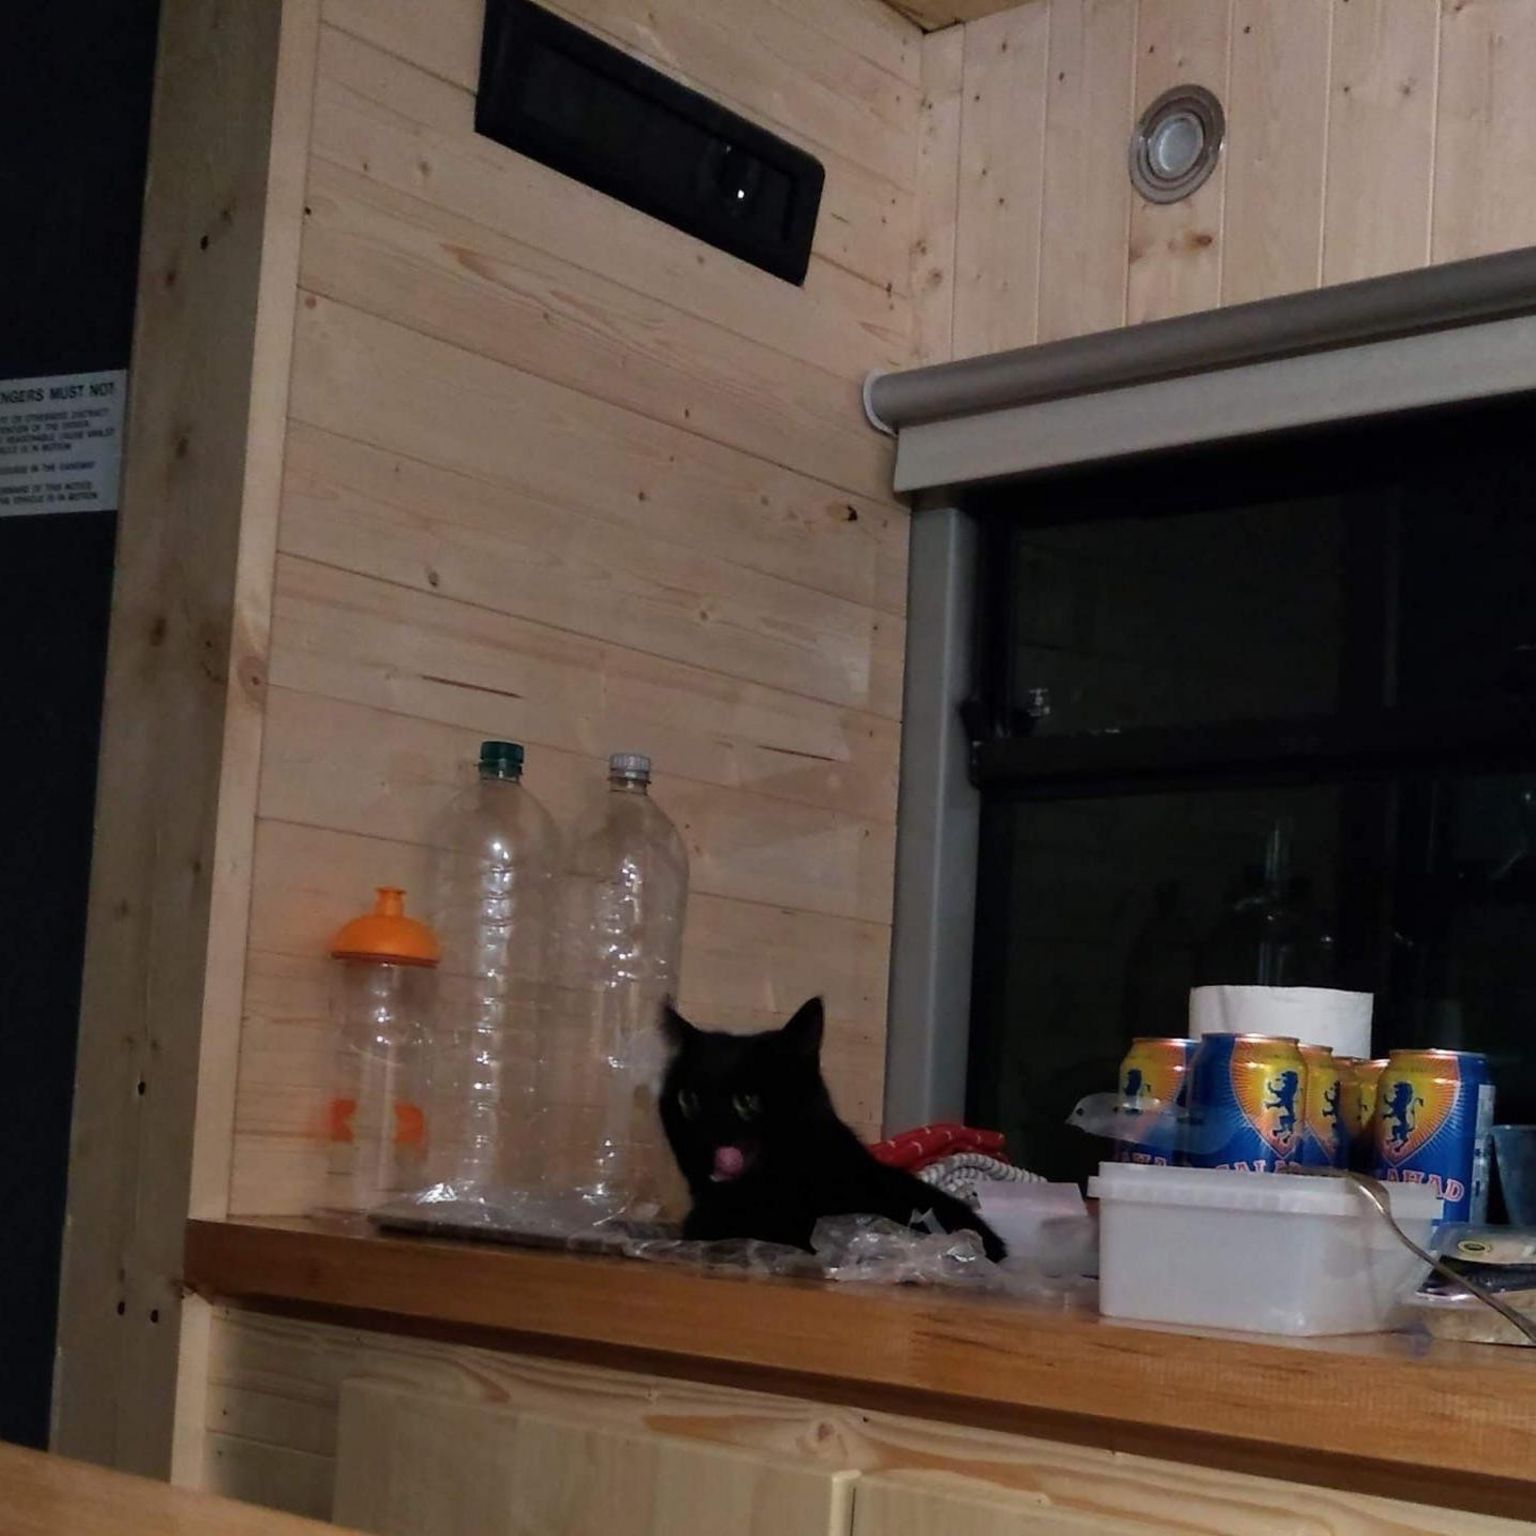 A cat sits on a kitchen panel in a converted bus.